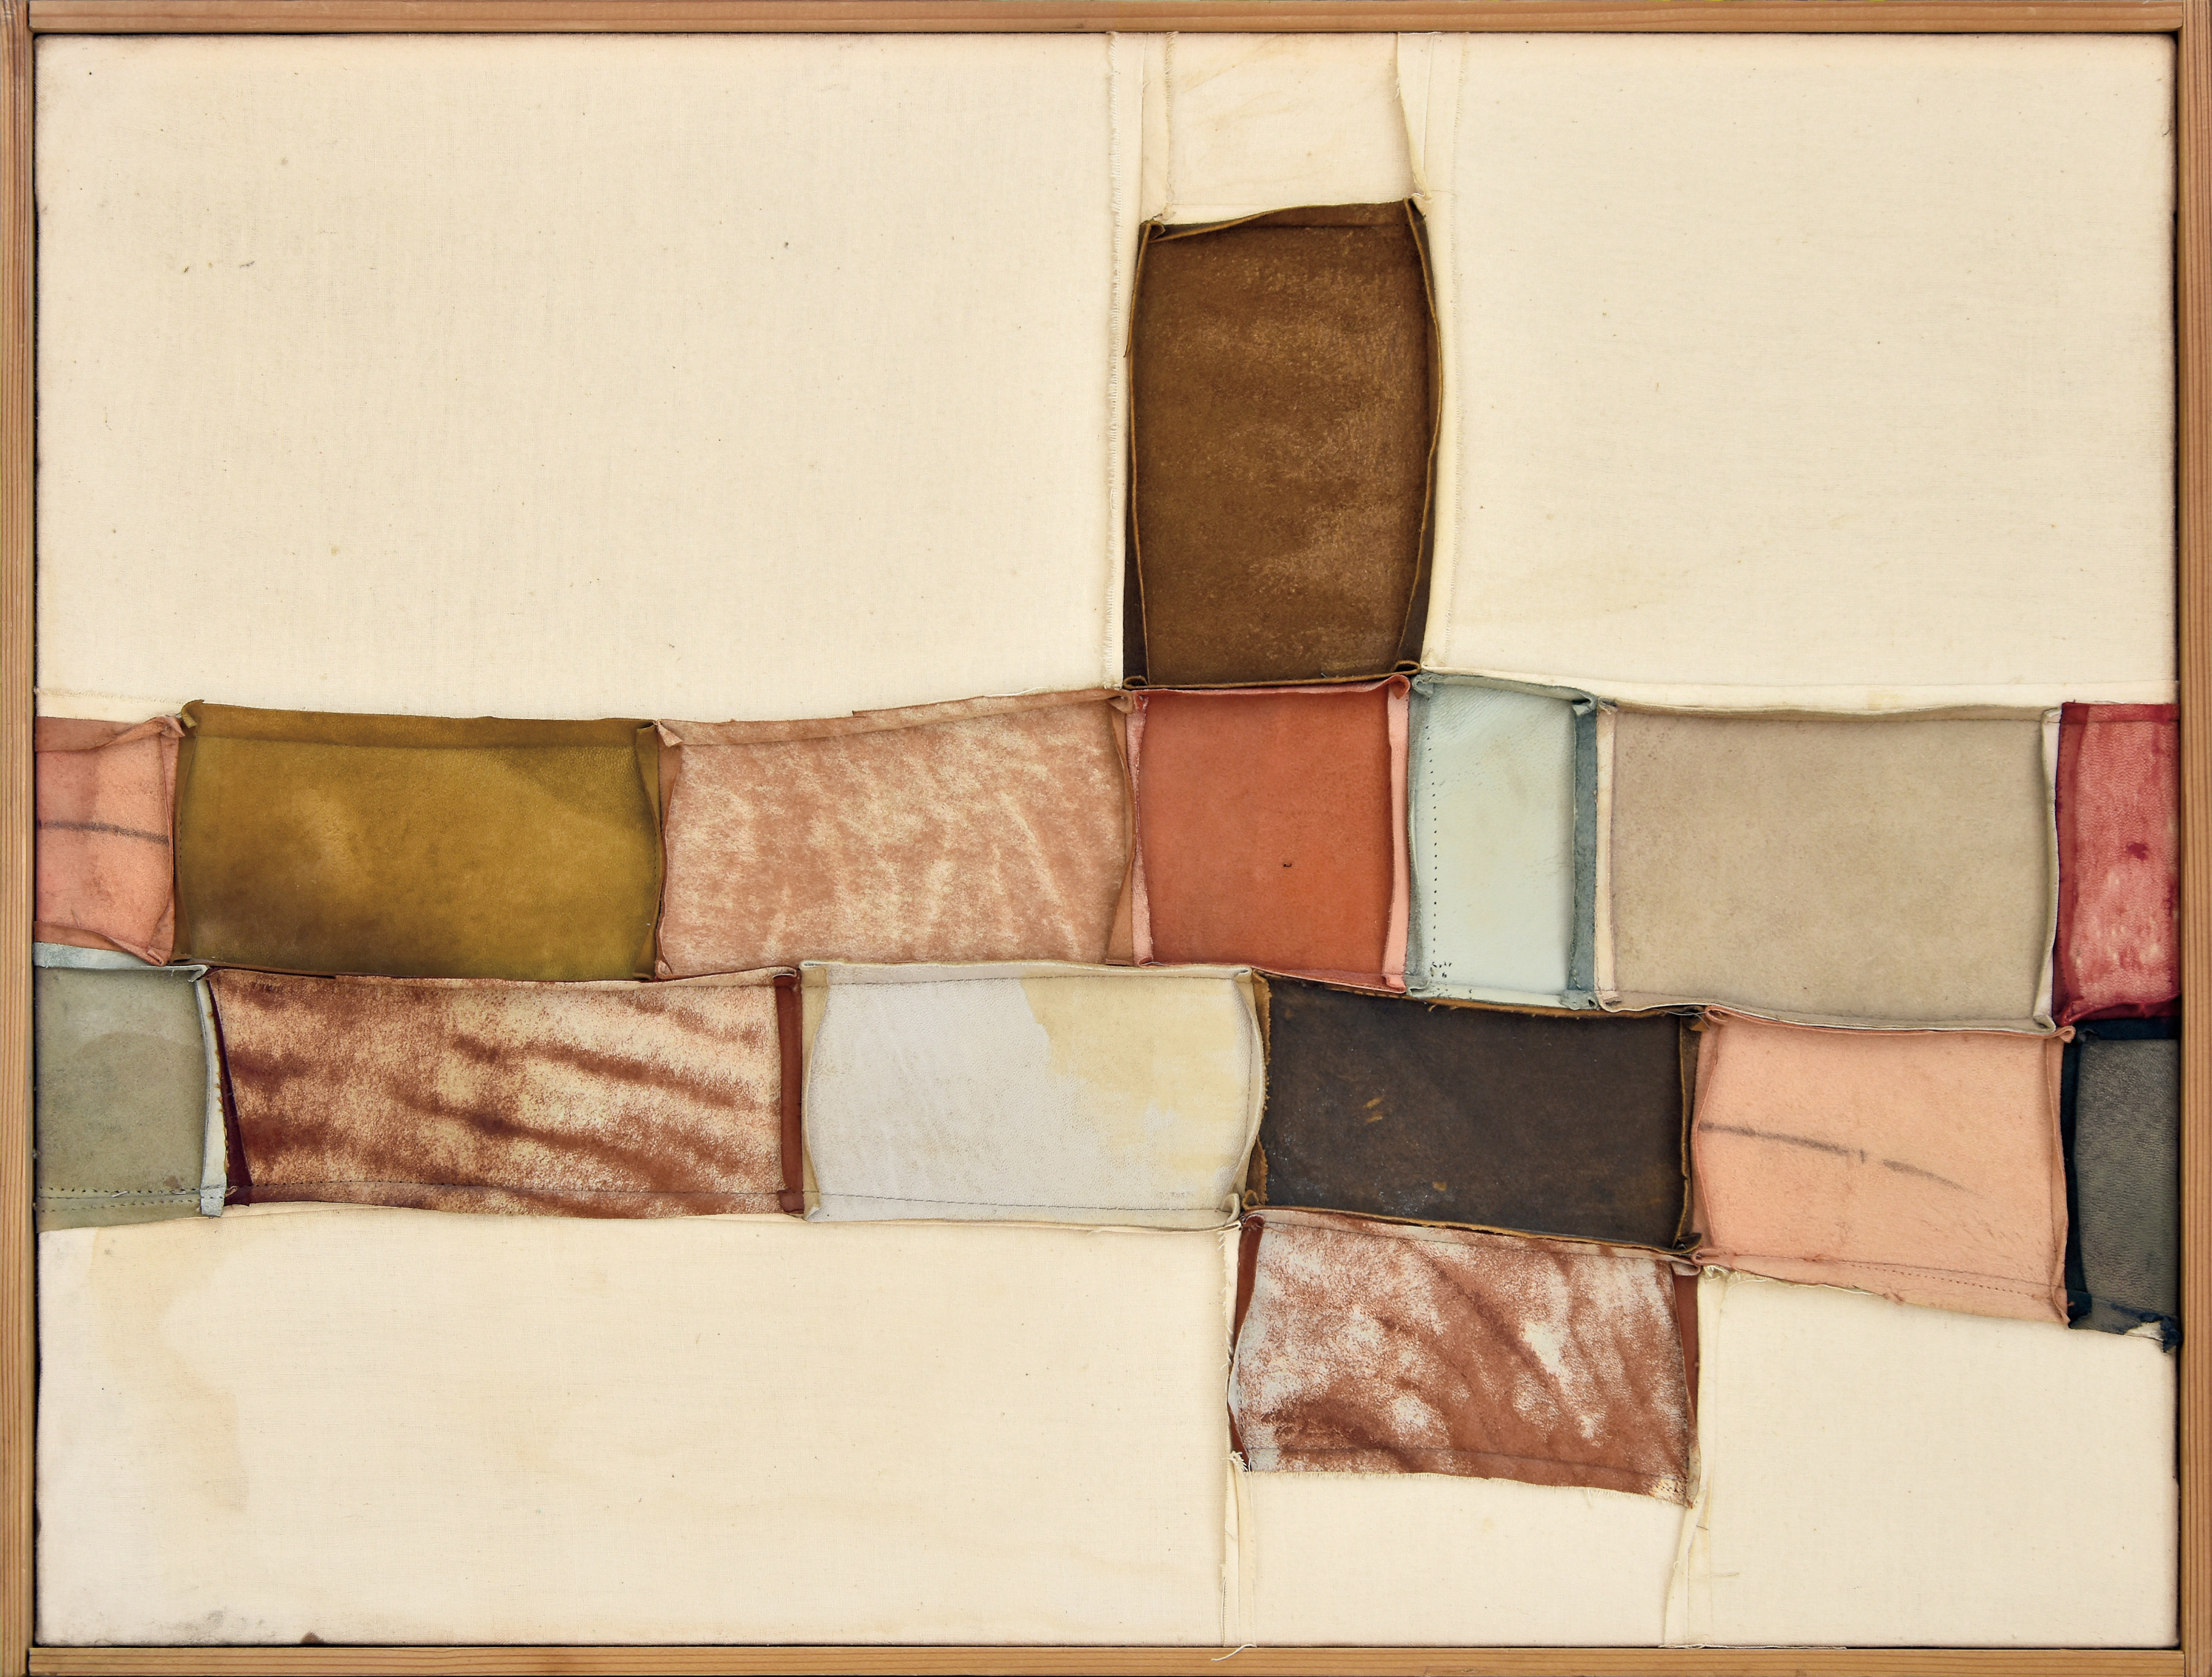 Nuvolo (Giorgio Ascani). Untitled. 1960. Sewn canvas and deerskin, 55 x 72 cm (21⅝ x 28⅜ in)